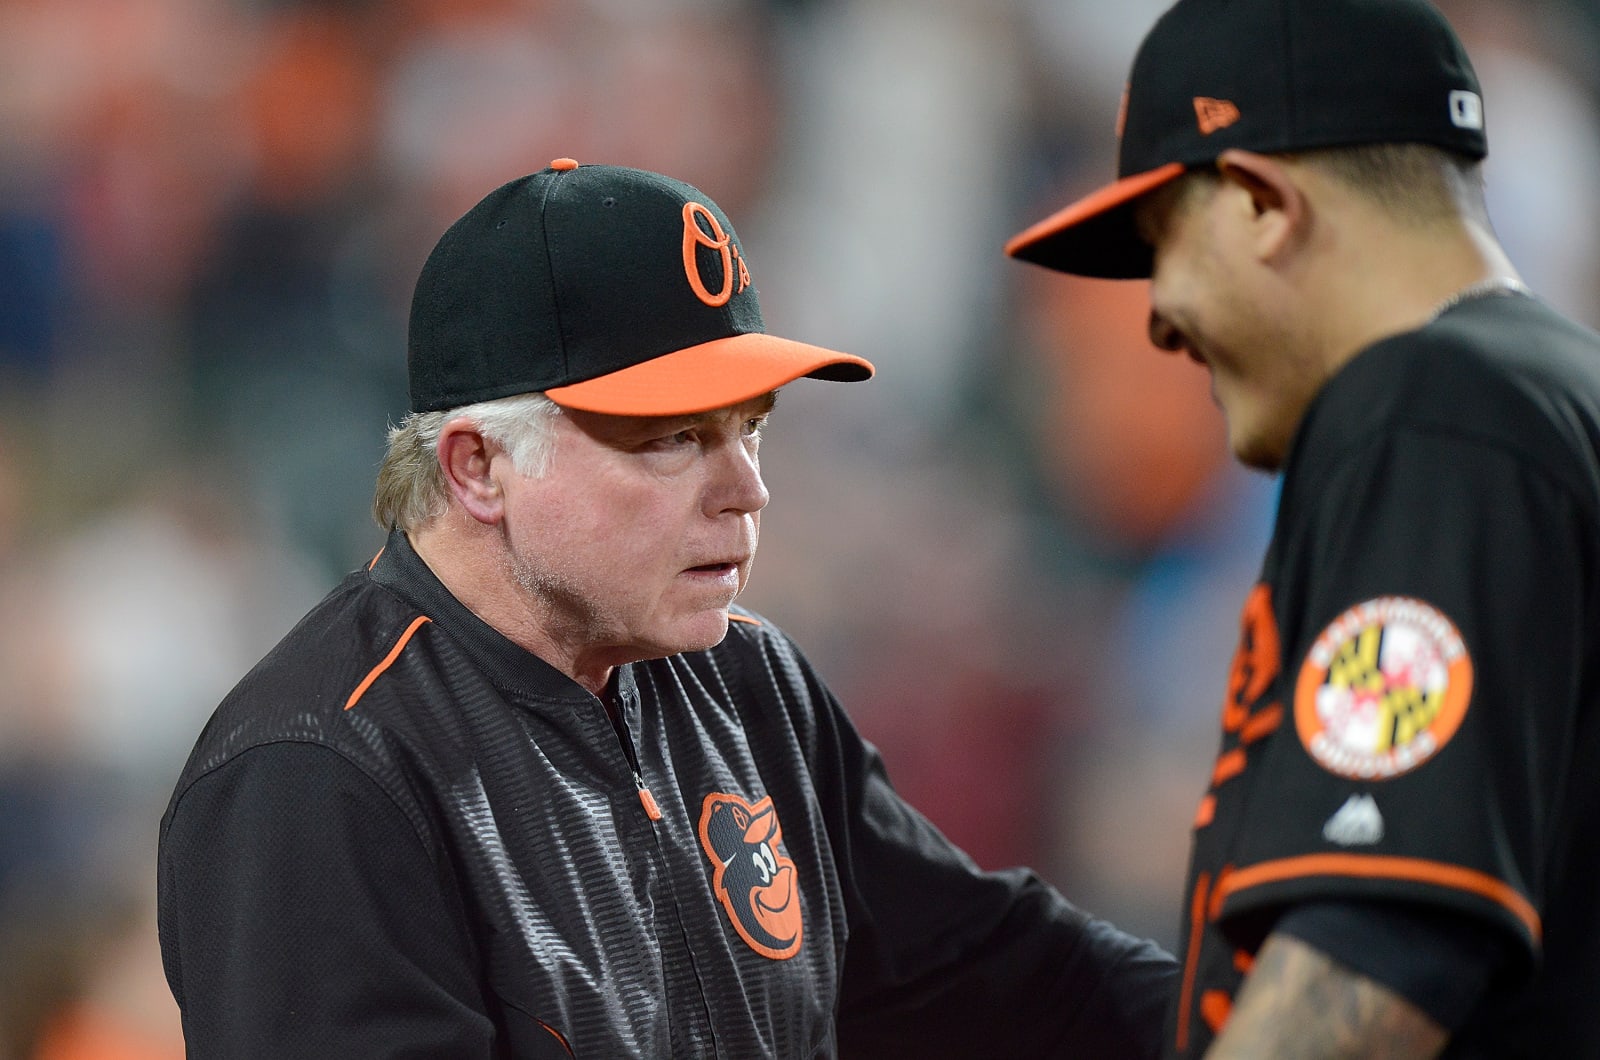 Baltimore Orioles: The best designated hitters in the team's history